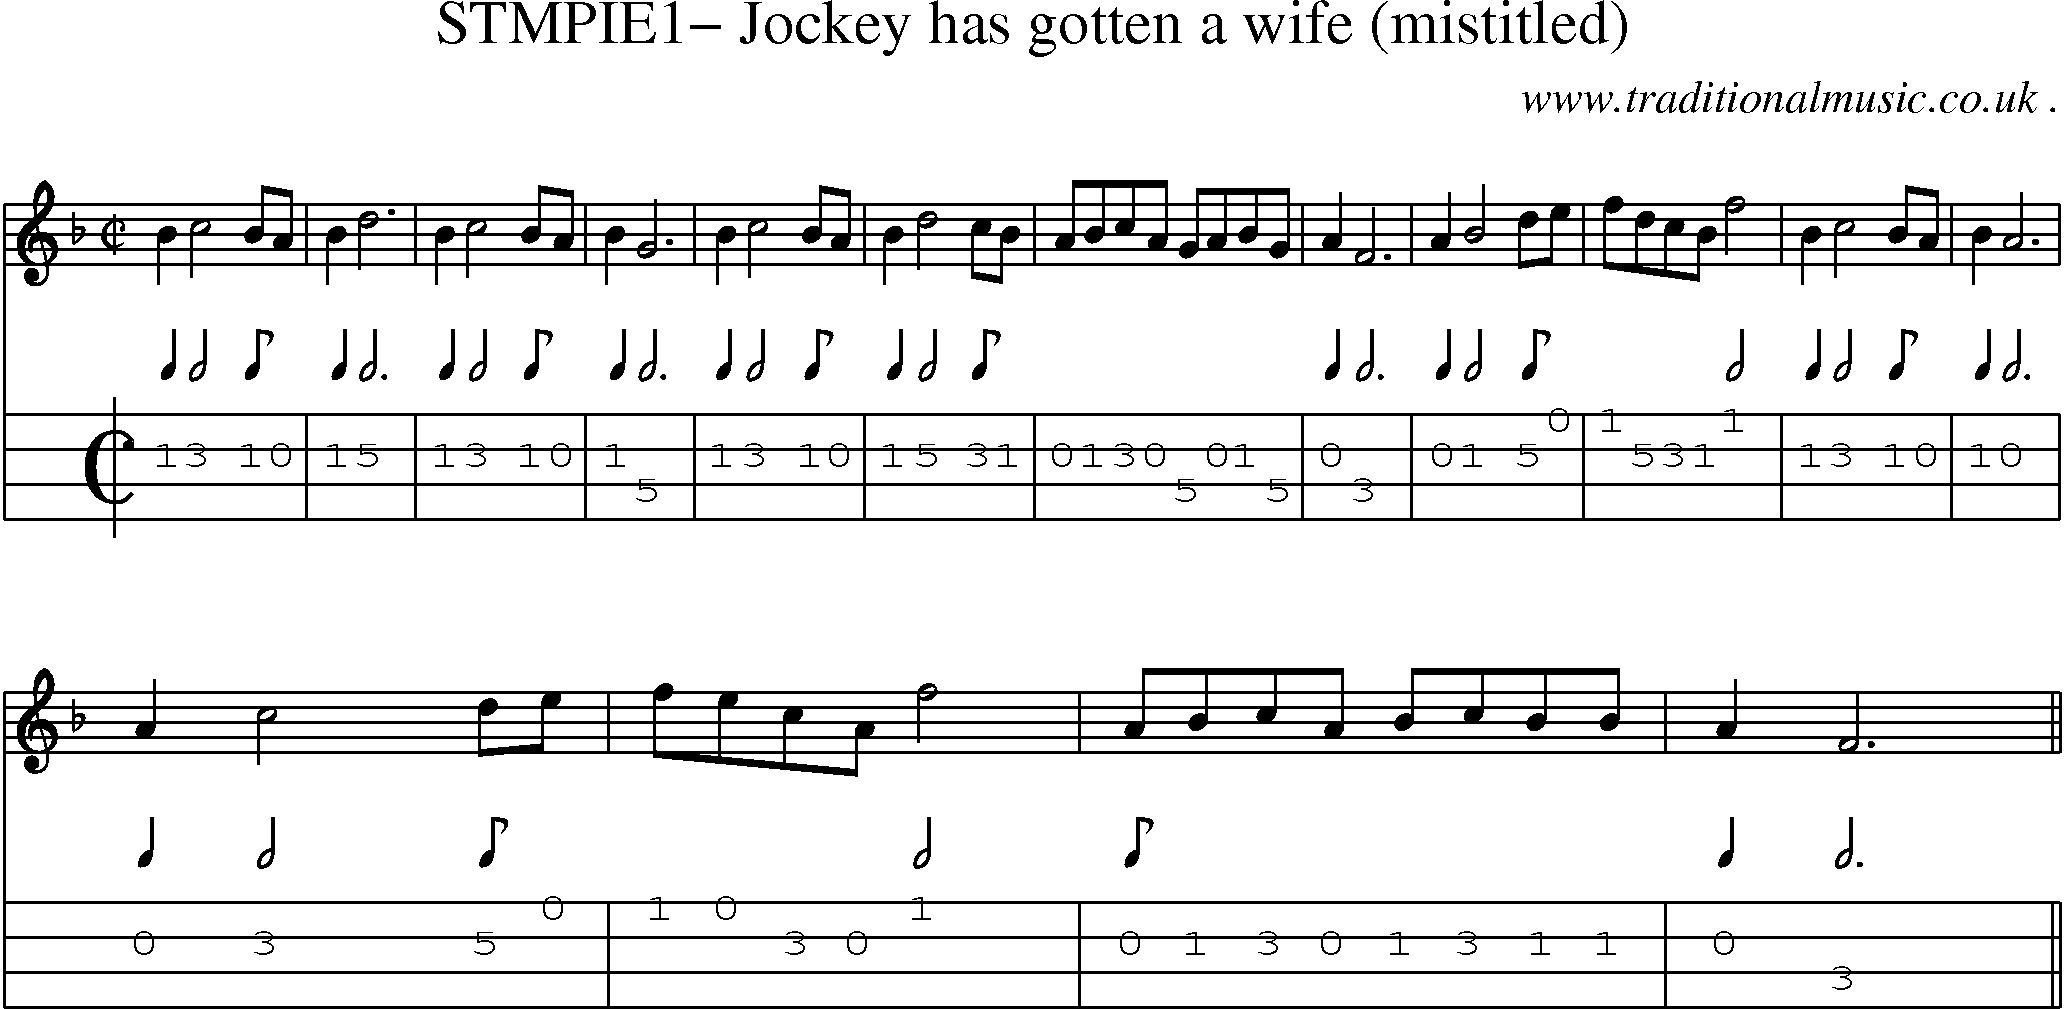 Sheet-Music and Mandolin Tabs for Stmpie1 Jockey Has Gotten A Wife (mistitled)